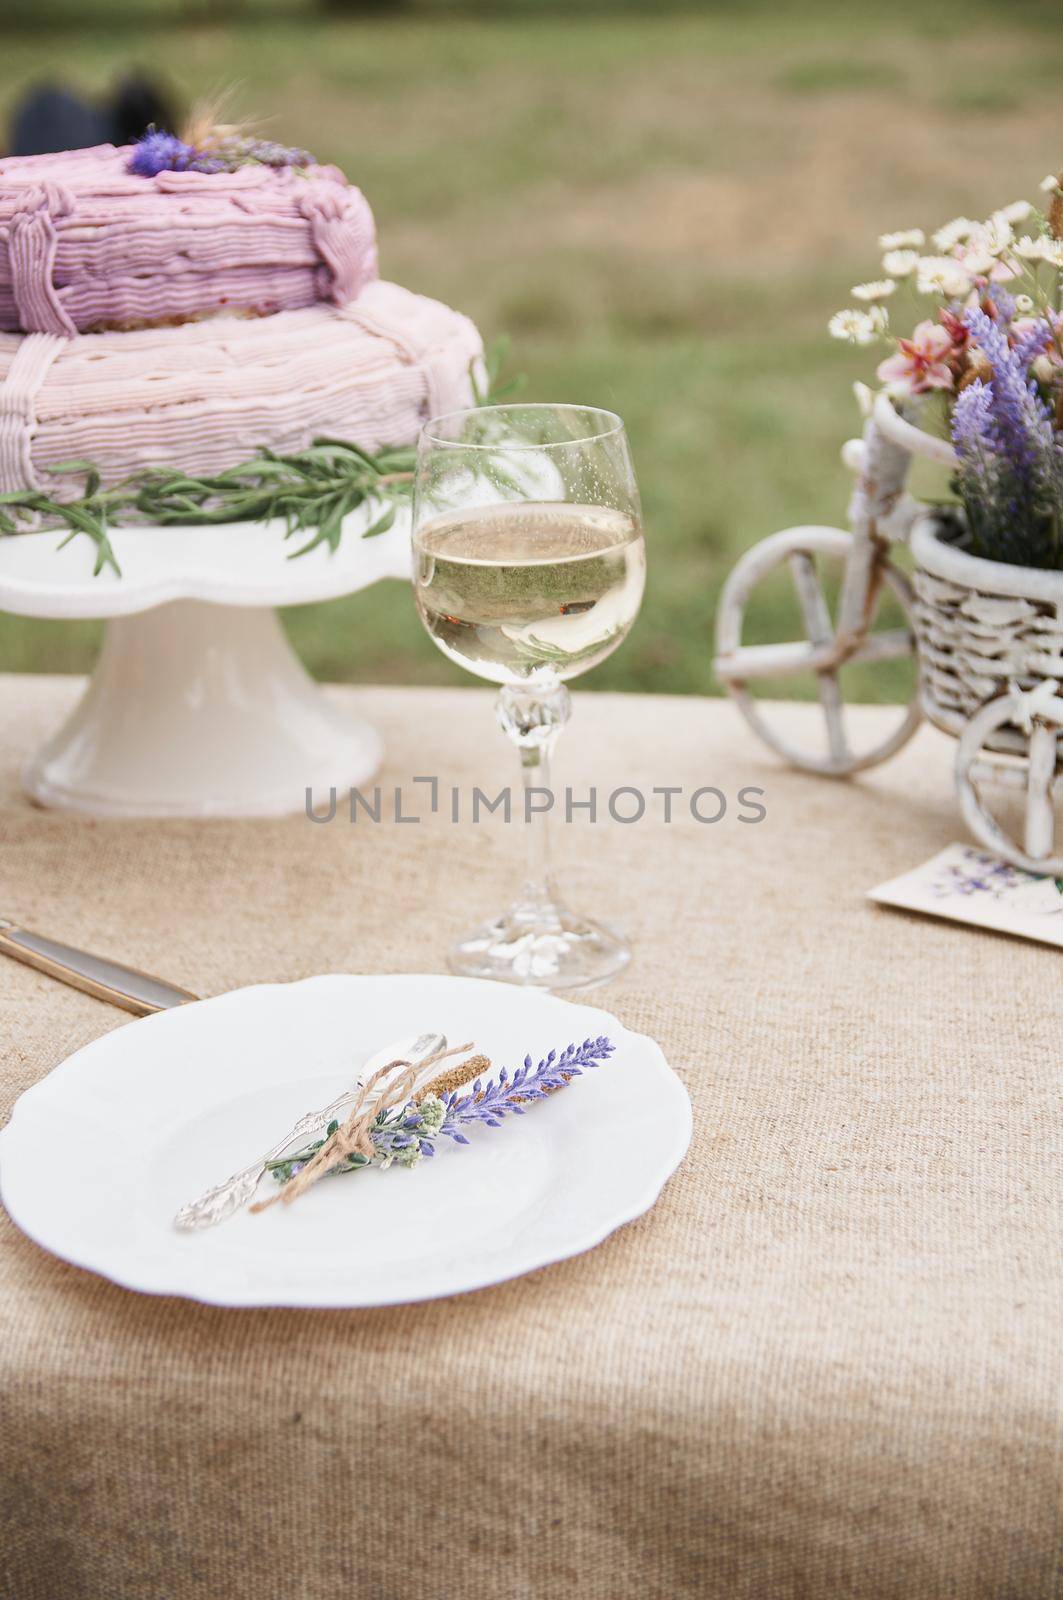 rustic style butter cake on a festive table with a glass  by ozornina